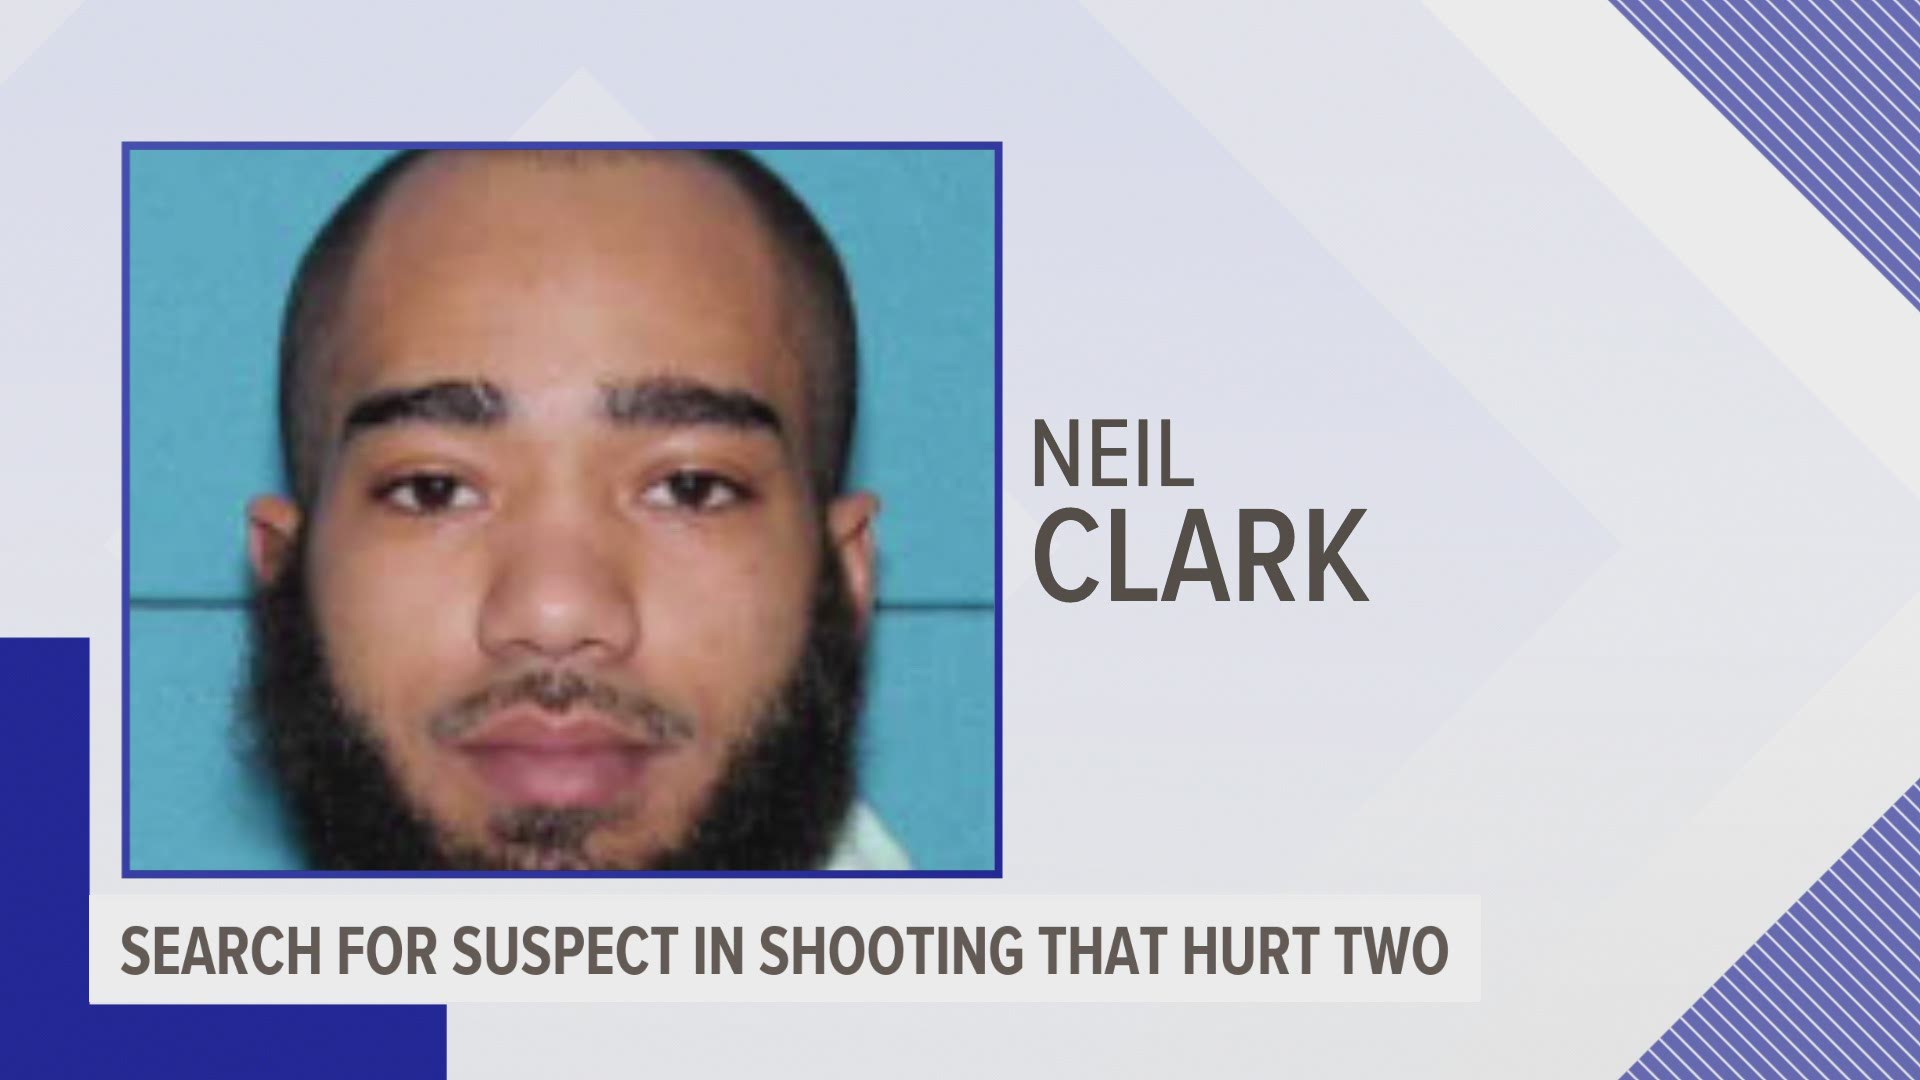 Cedar Rapids resident Neil Darrell Clark, 26, is wanted by police for several charges, including attempted murder and willful injury.